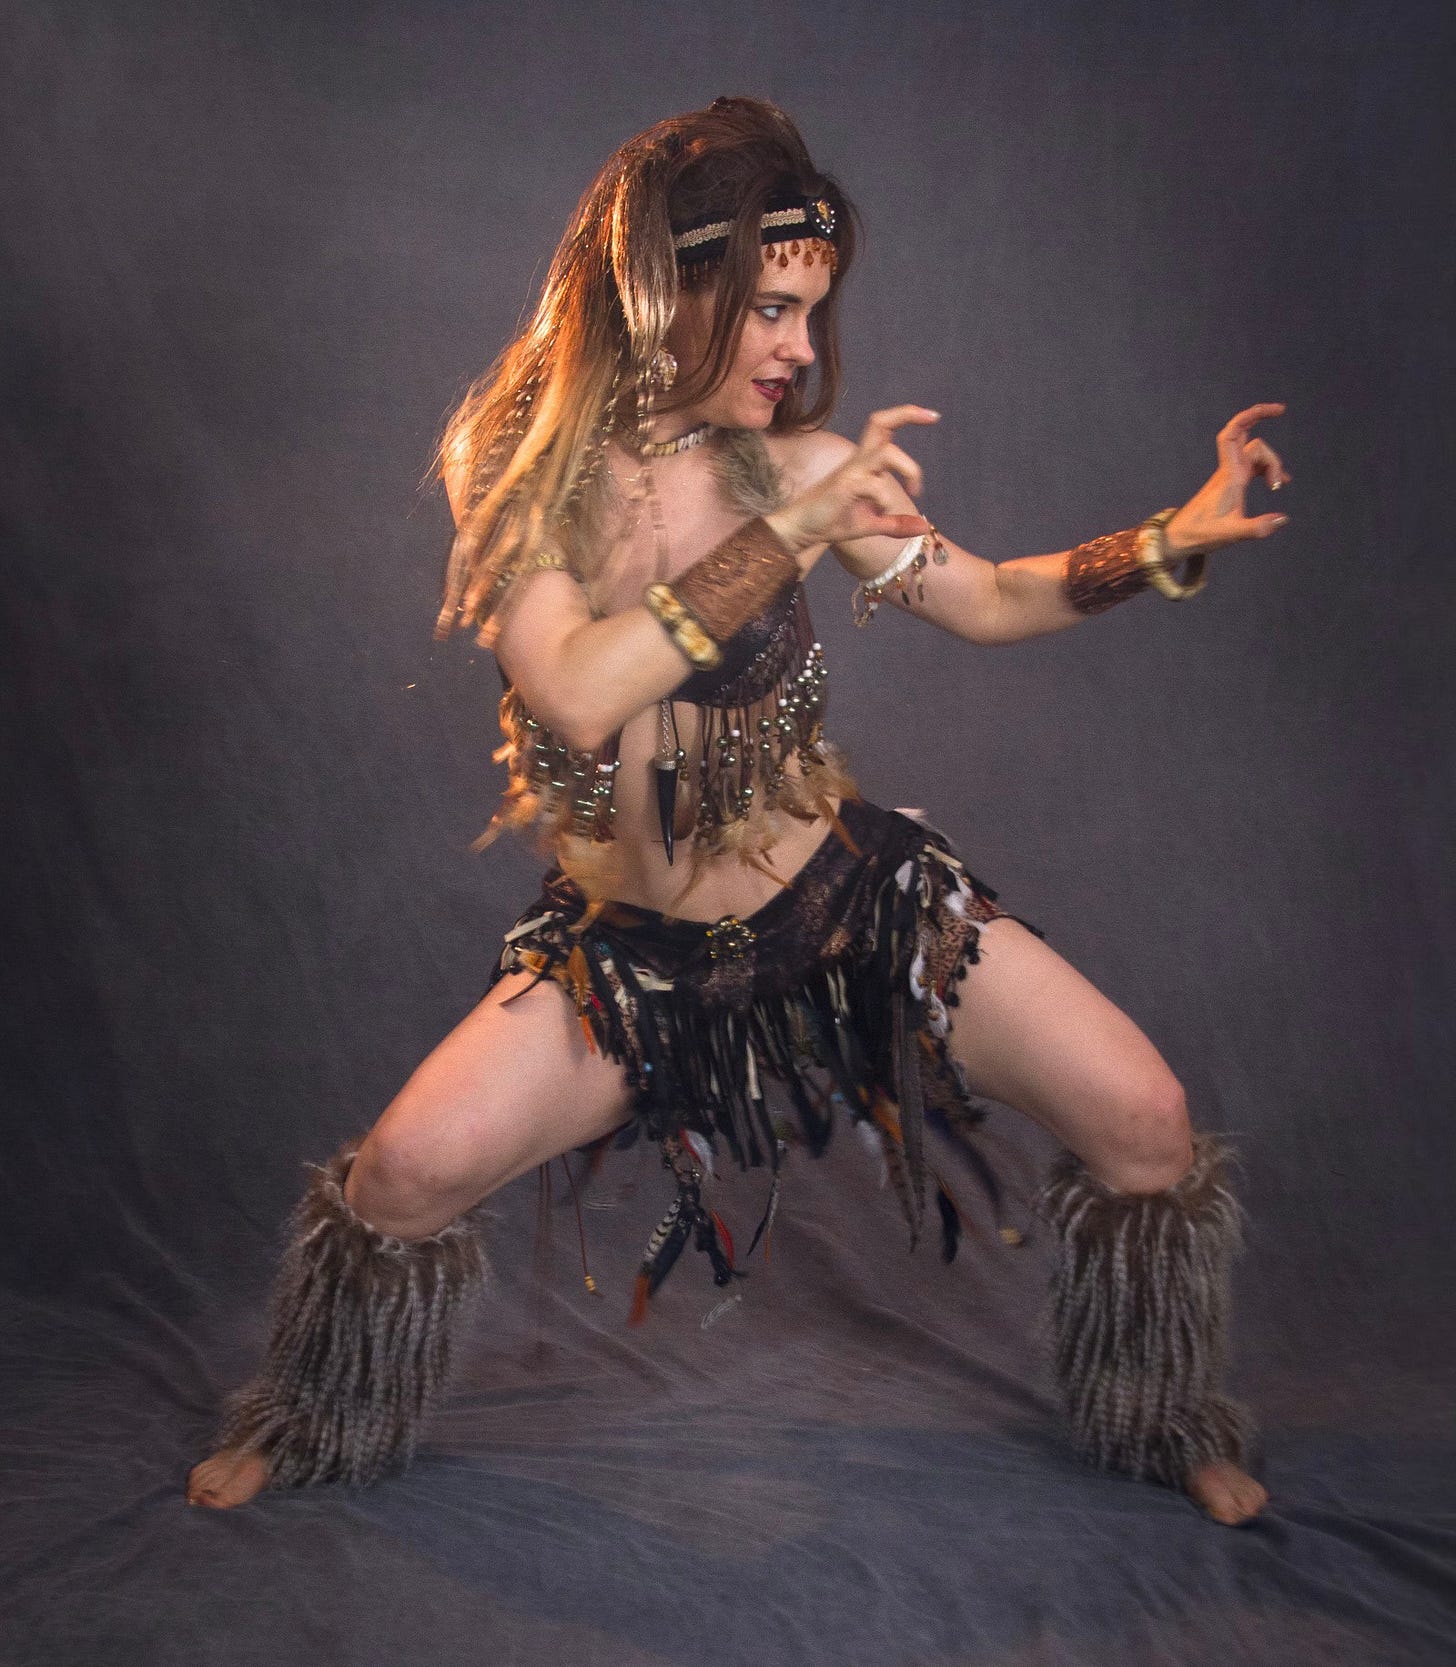 The author in a wild woman costume of fur, feathers, and fringe, in a deep stance with clawed hands at the ready and a gaze speared upon her target.